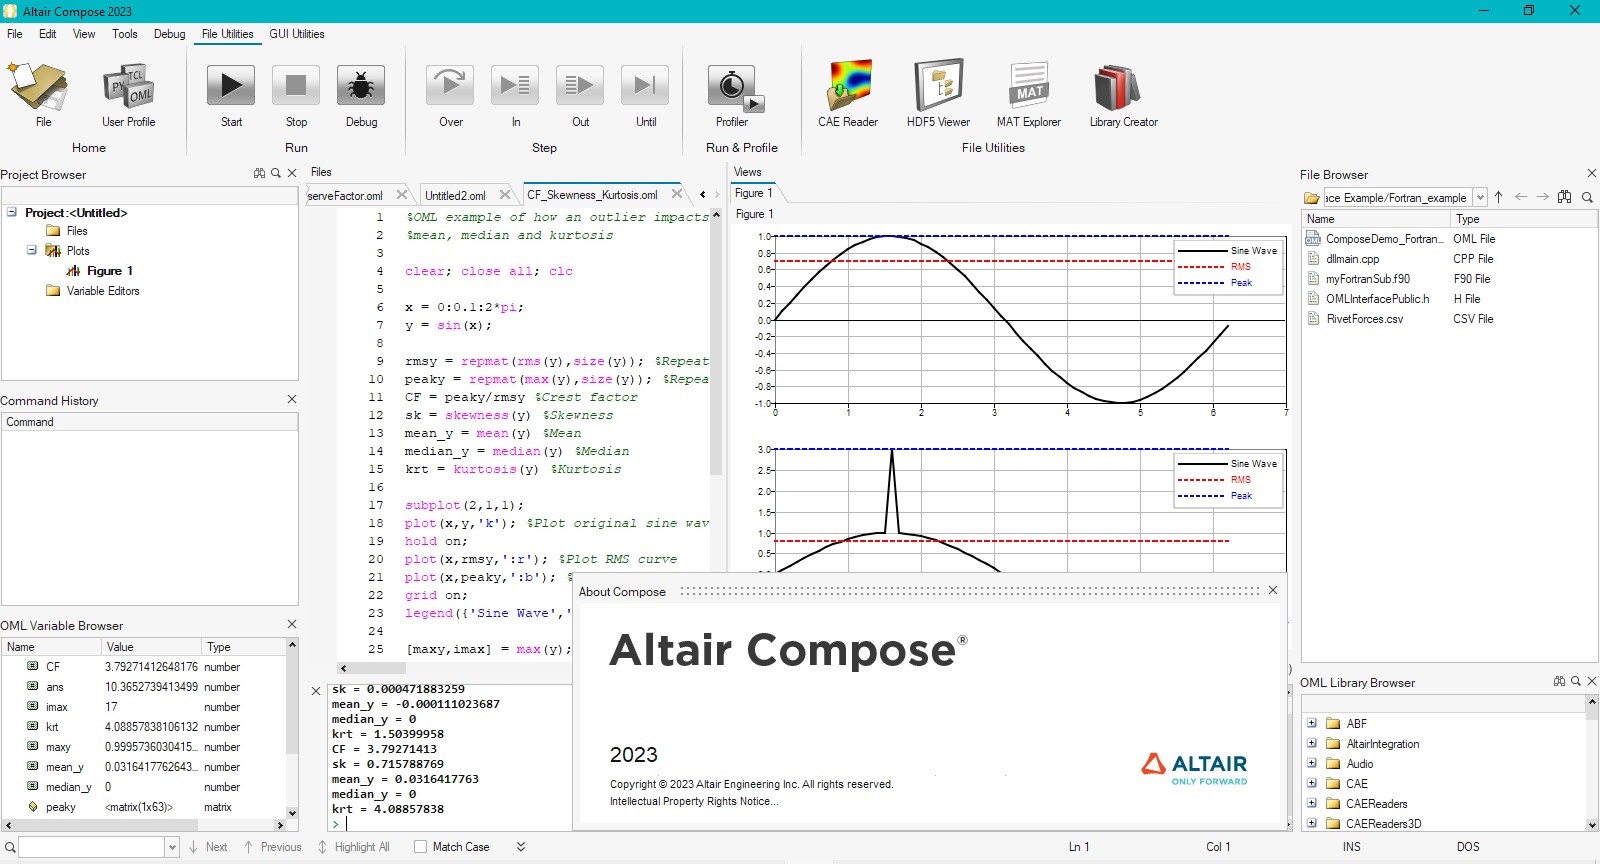 Working with Altair Compose 2023.0 full license